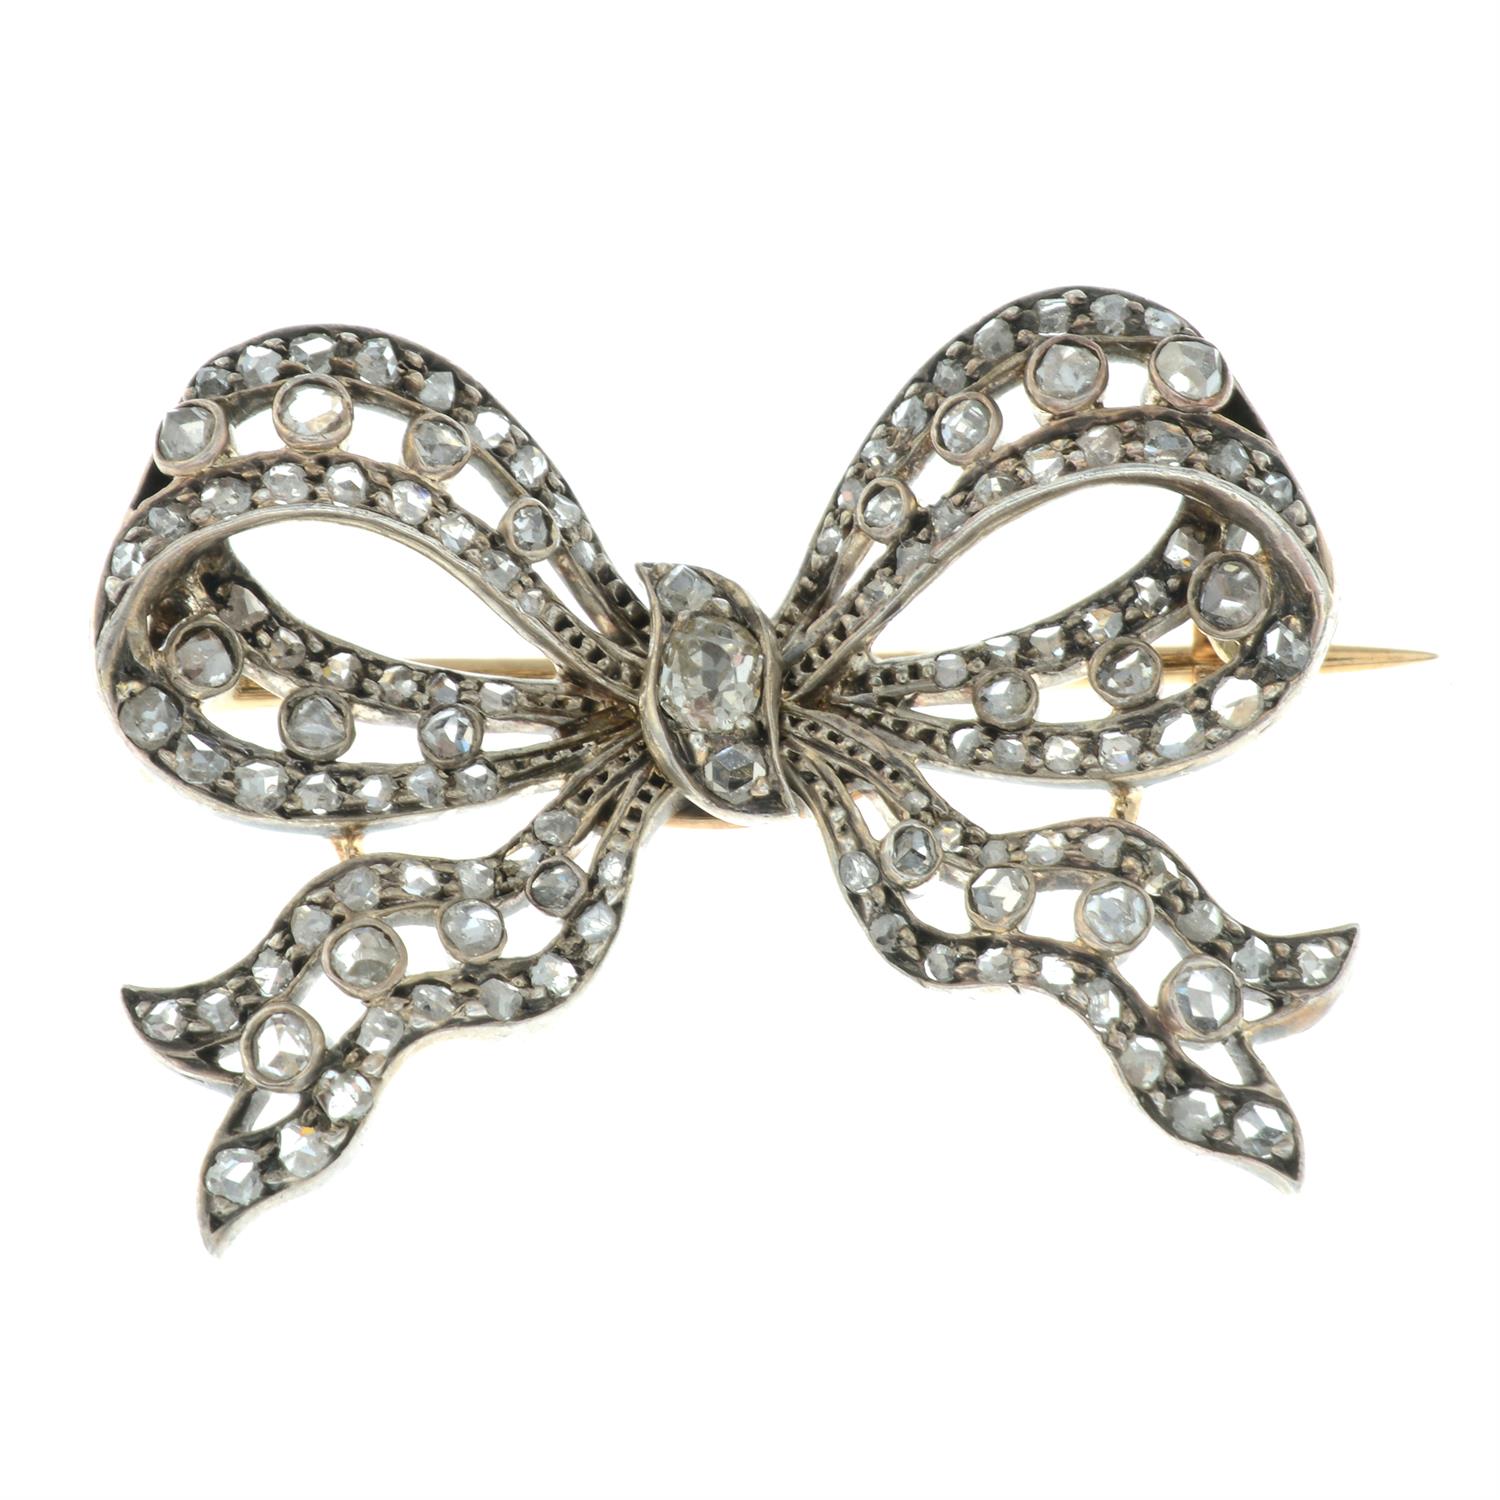 An early 20th century silver and gold old and rose-cut diamond bow brooch. - Image 2 of 4